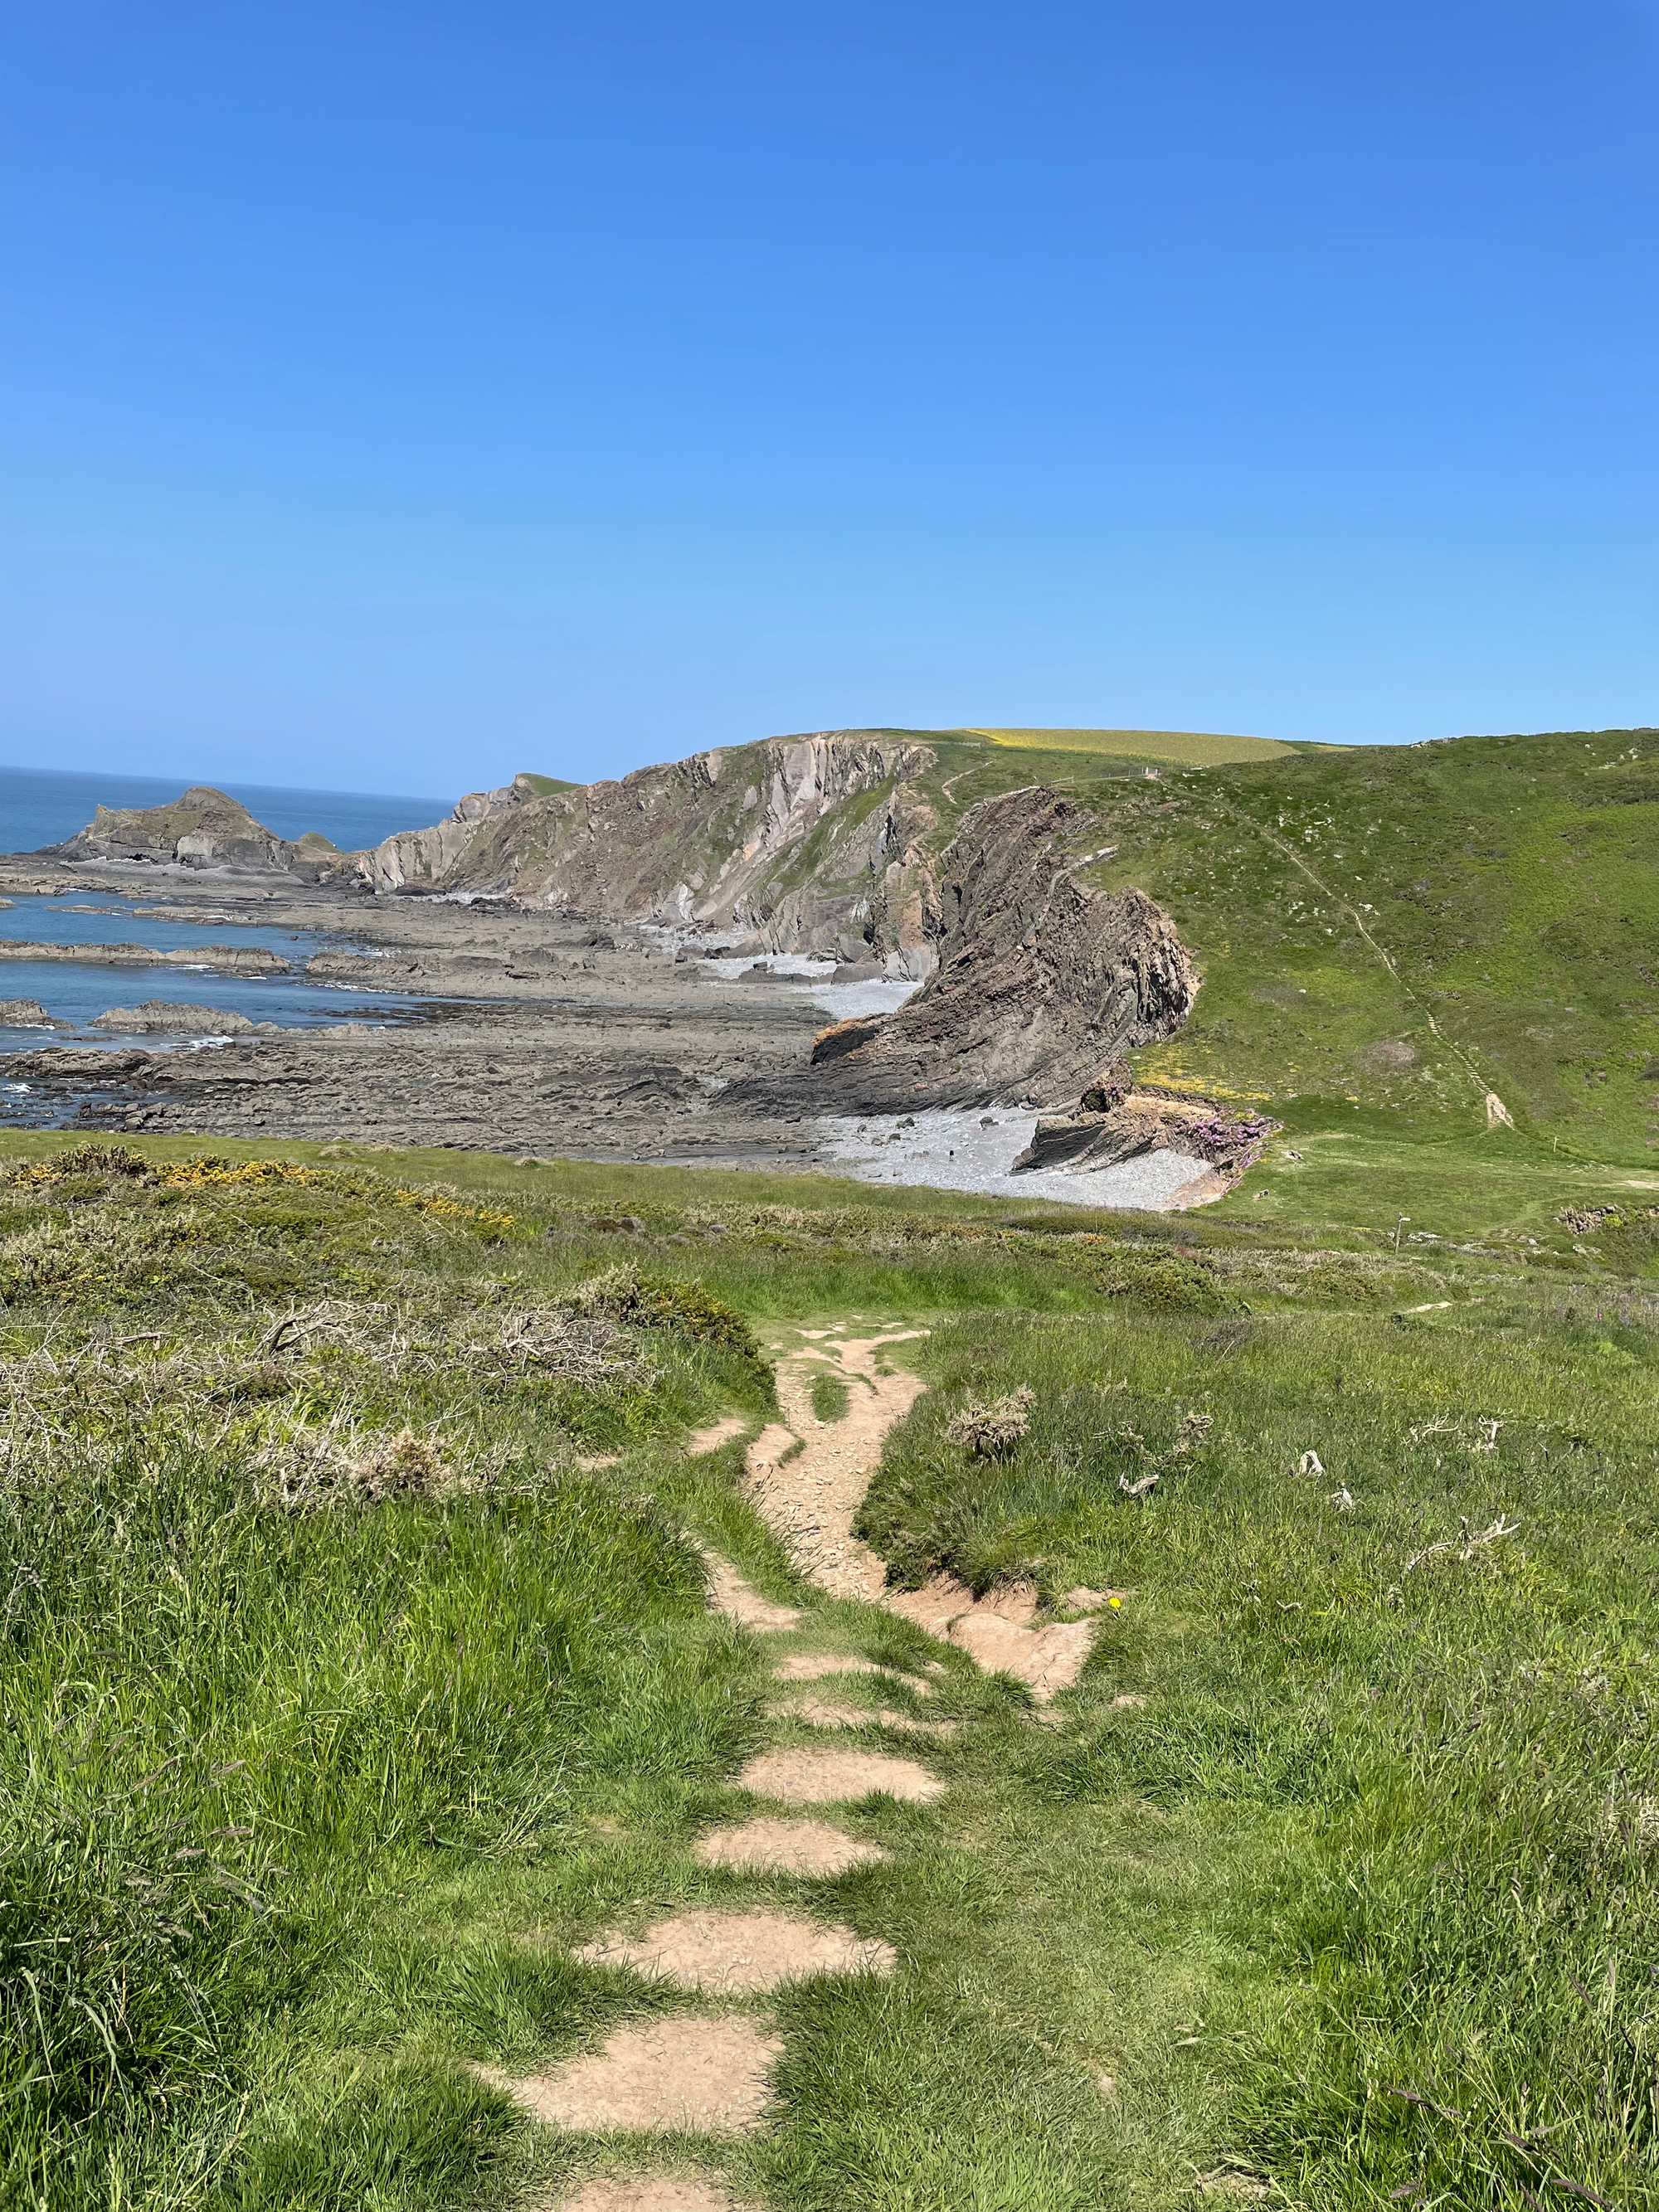 Day 9 - The path opening out onto cliff tops around Hartland